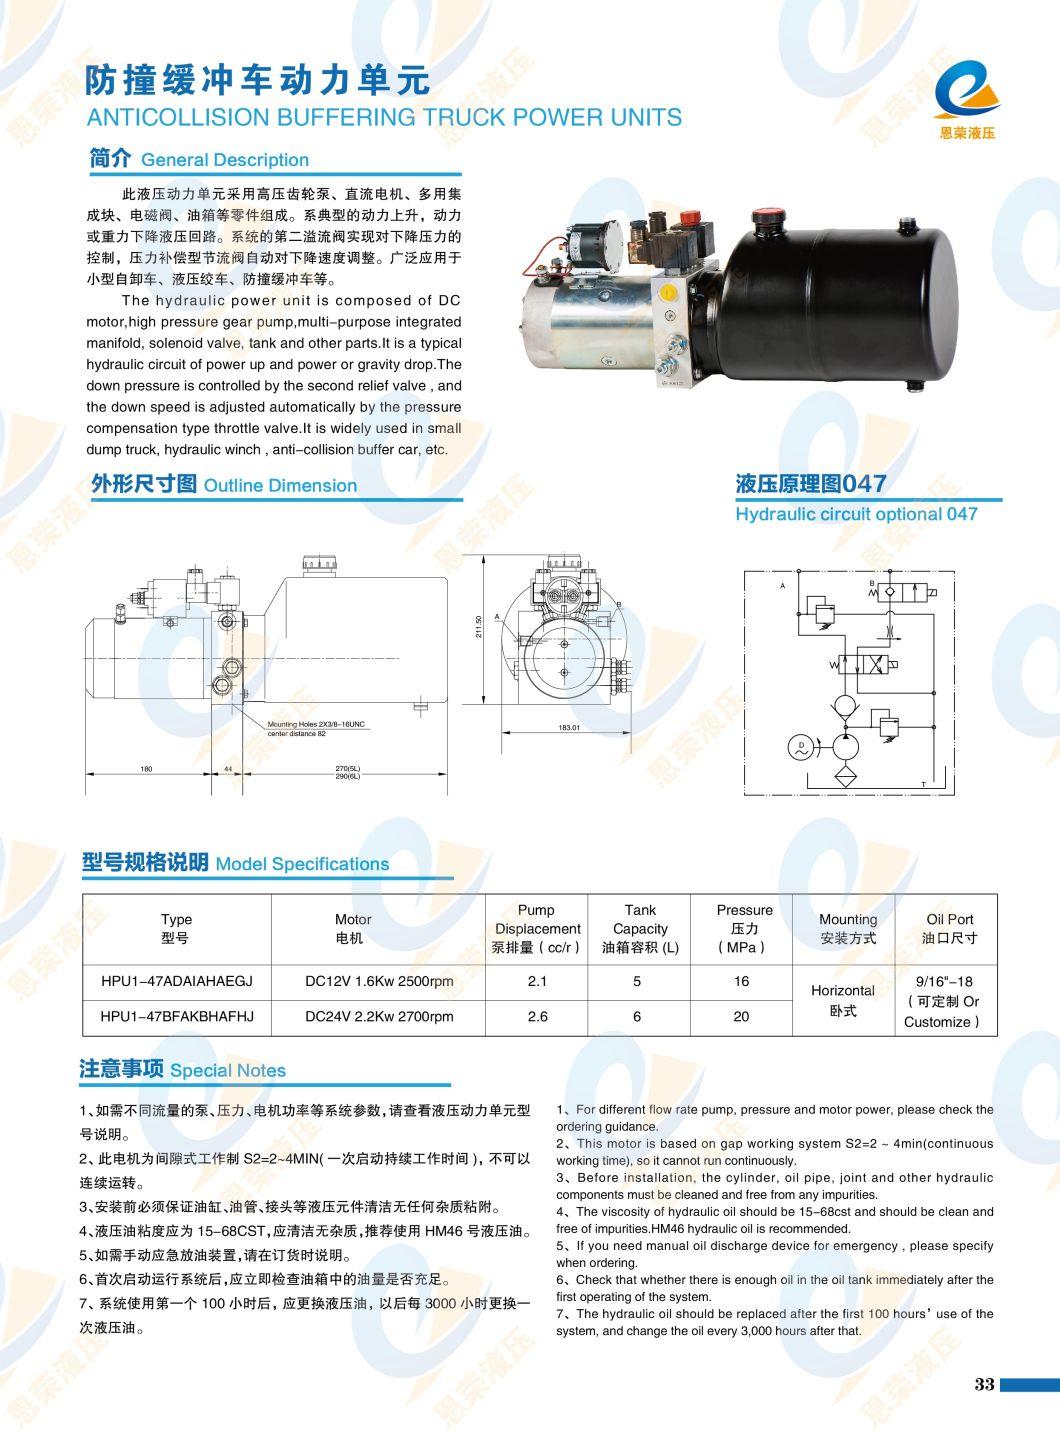 Double Acting Hydraulic Power Unit for Dump Truck / Dump Truck for Dump Truck